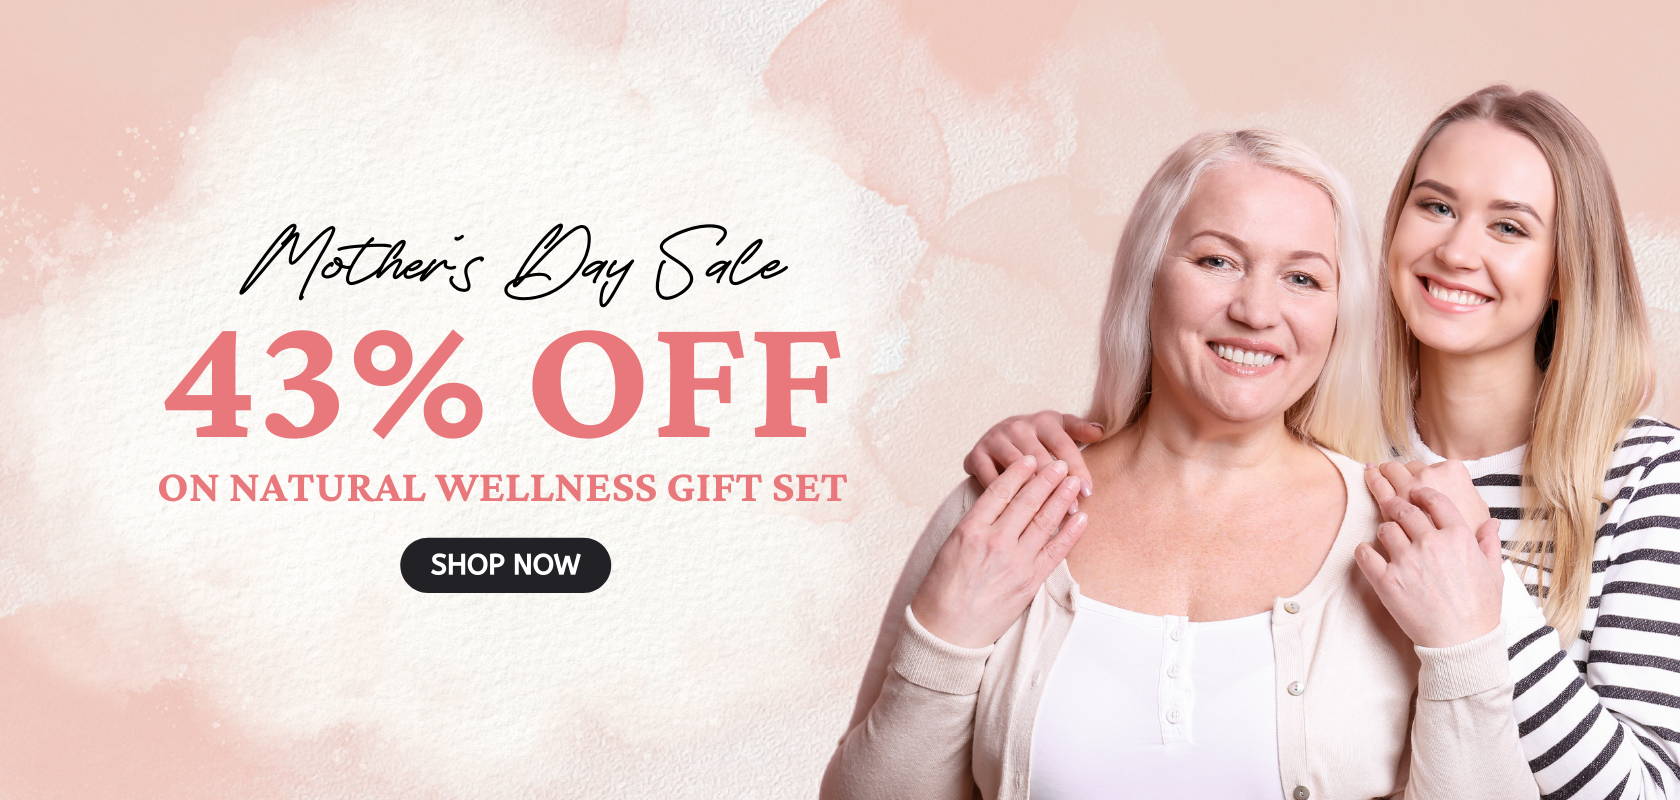 Mother's Day sale up to 43% off on natural wellness gift set. Shop now!